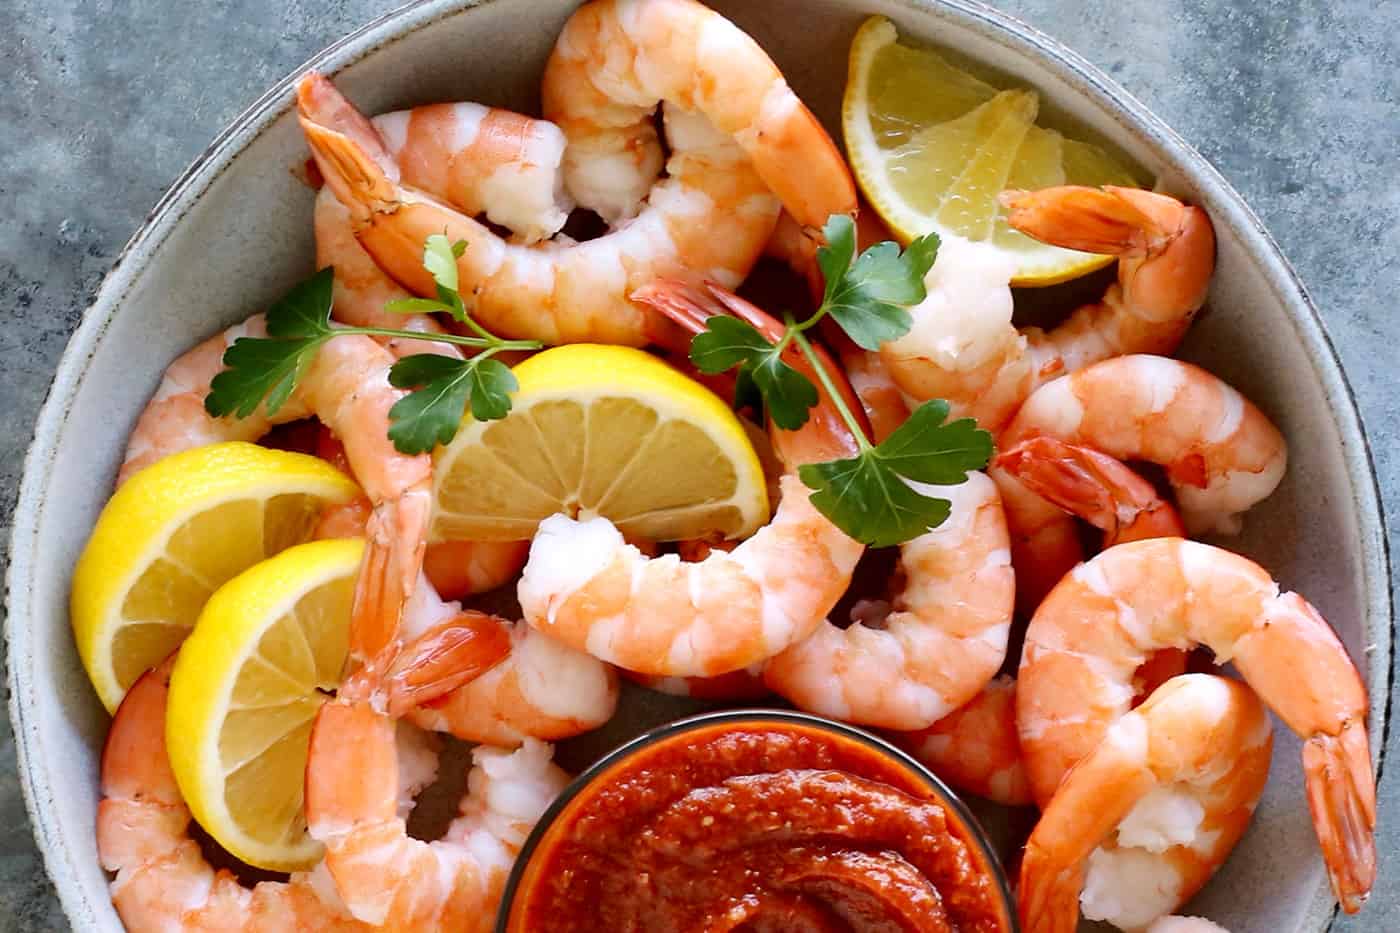 Overhead view of a bowl of shrimp with a dish of cocktail sauce